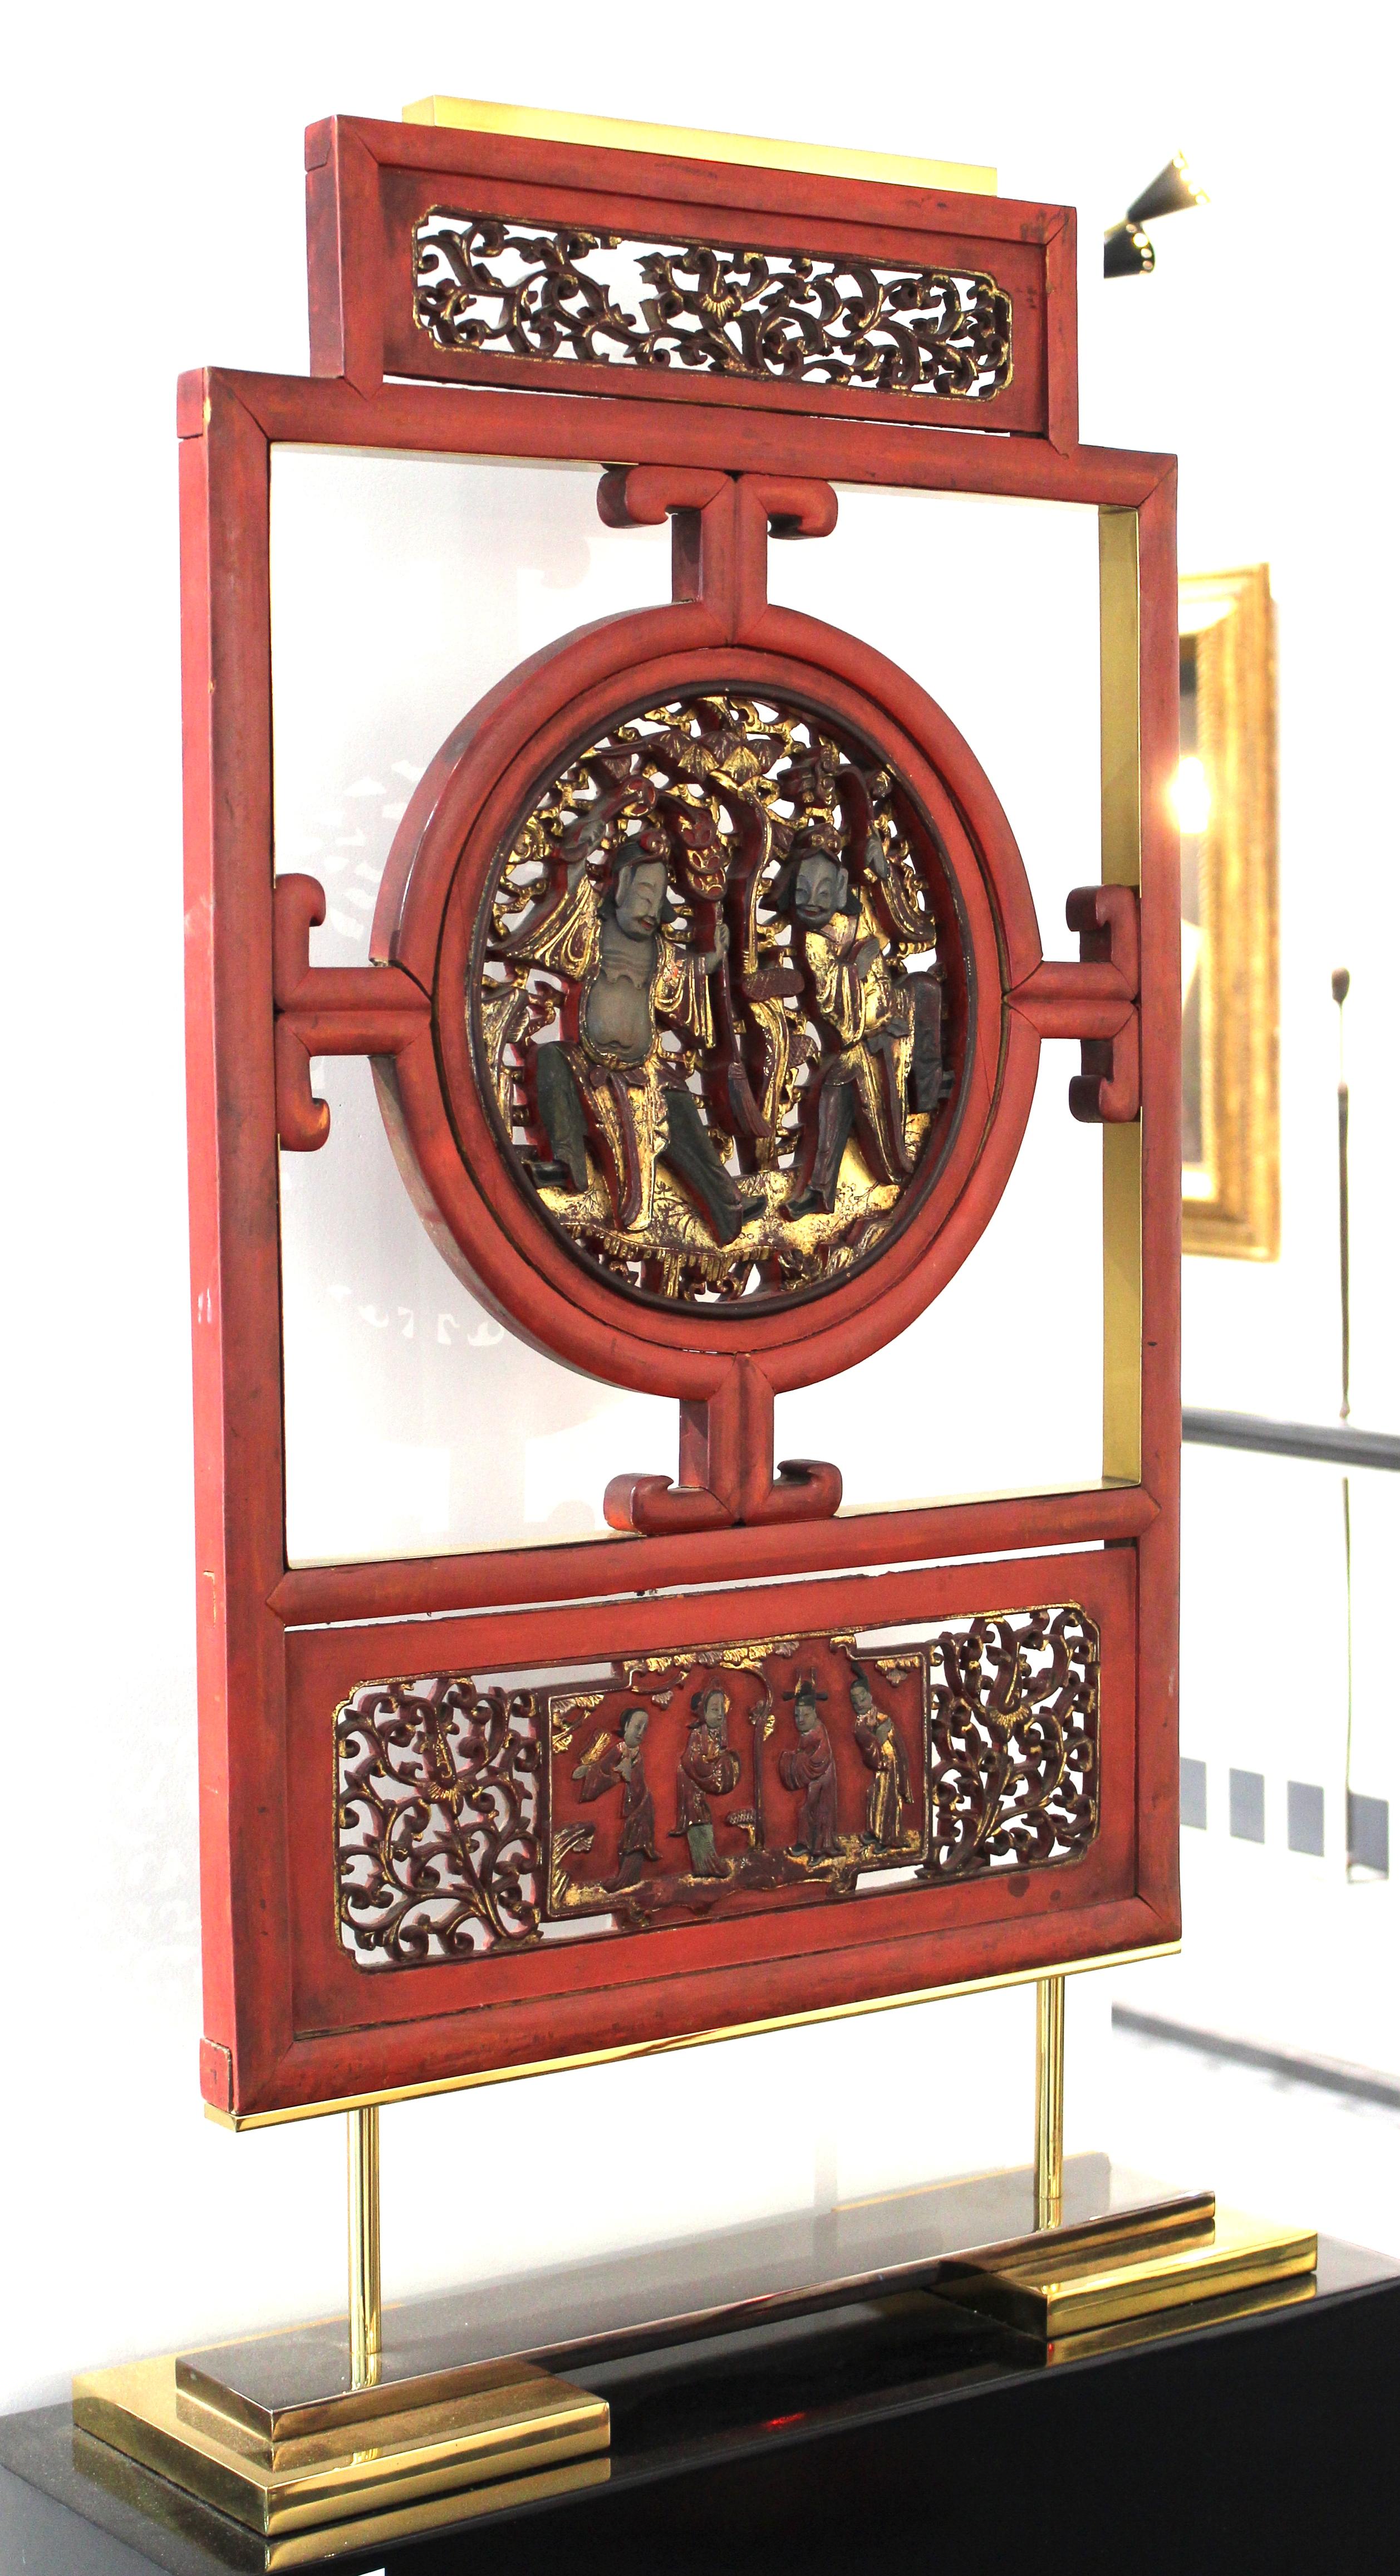 Late 20th Century Asian Modern Lacquer Screen Element Mounted on Stand Attributed to Karl Springer